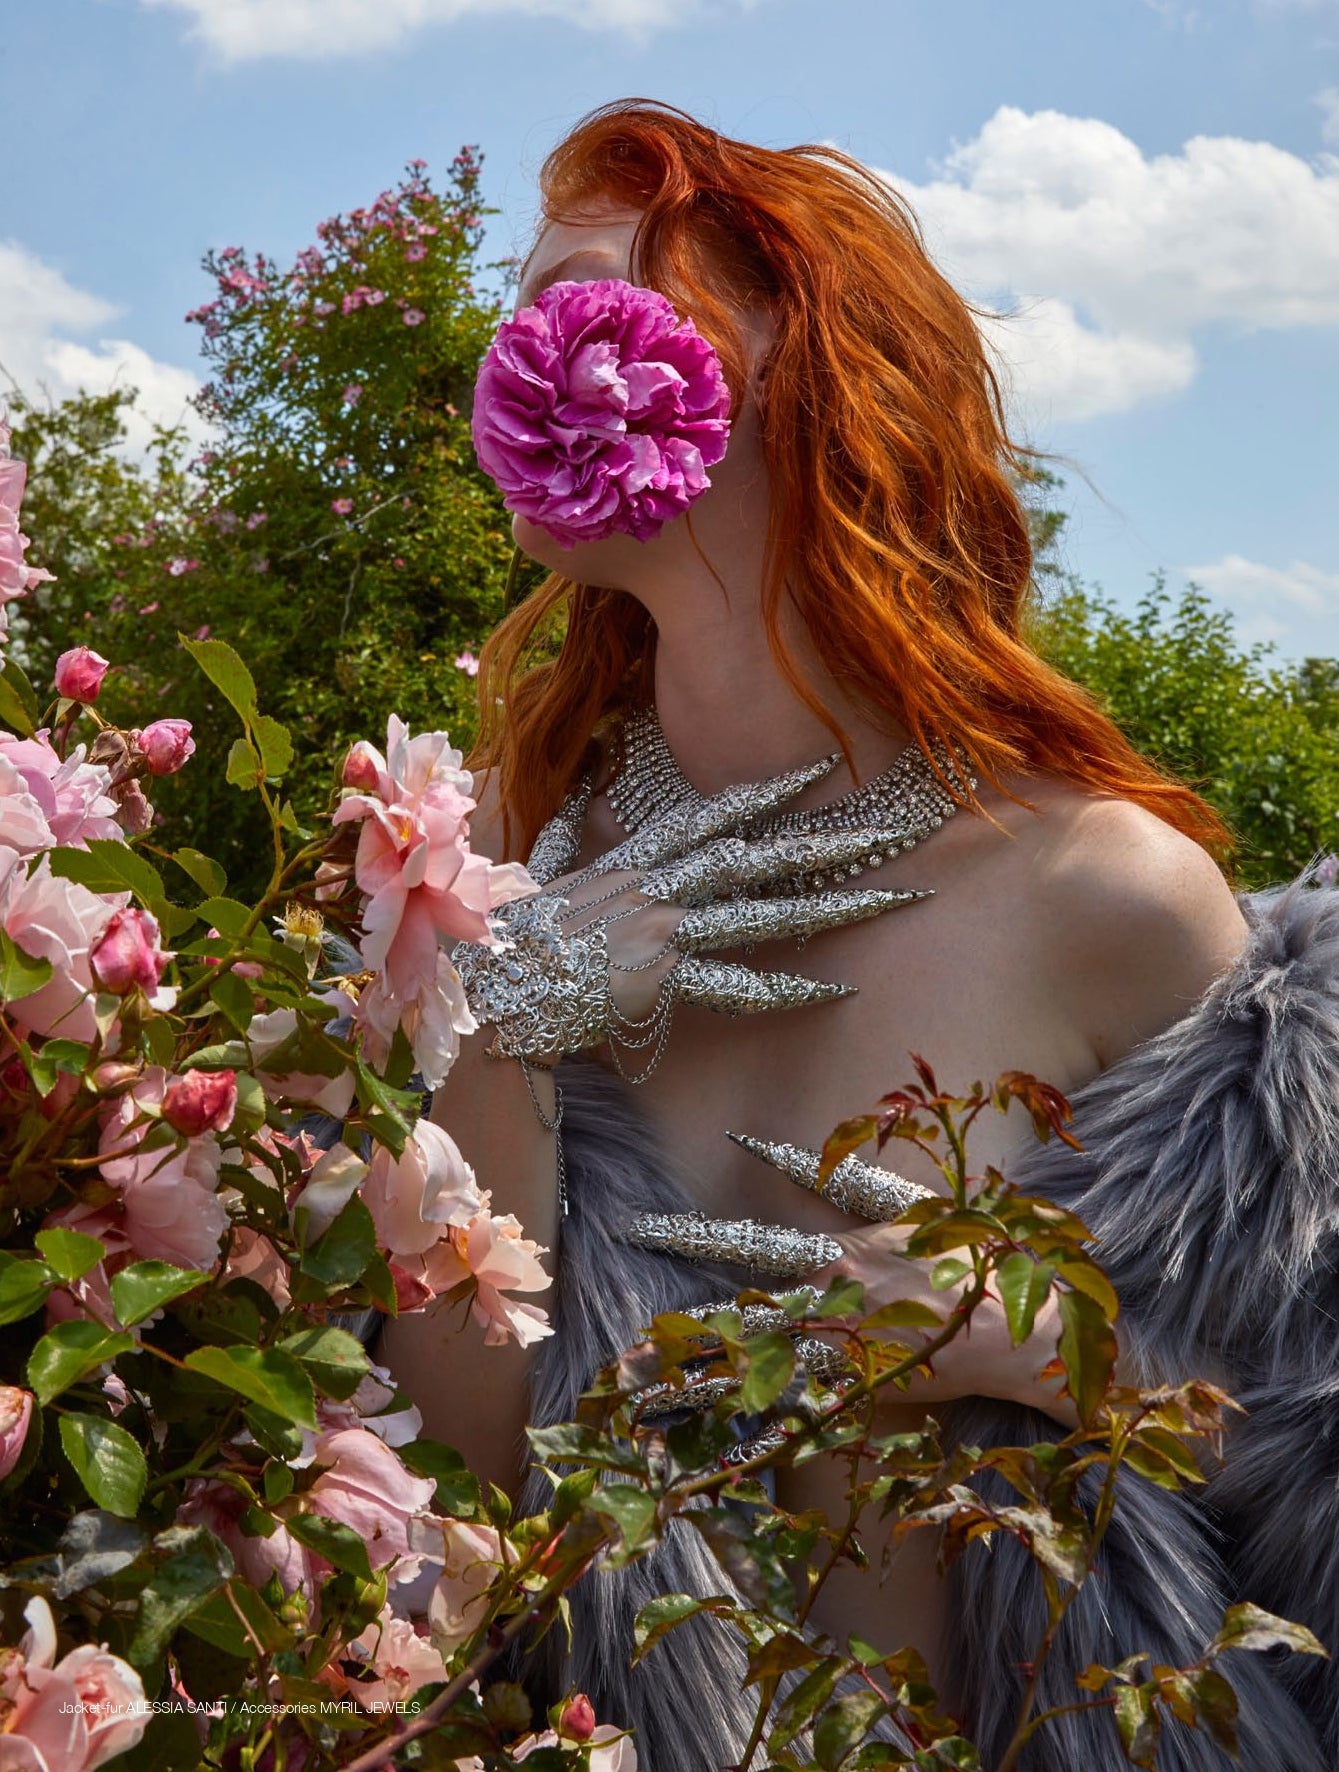 In a vibrant garden, a model with fiery red hair becomes one with nature, her face obscured by a deep pink bloom, embodying the whimsical goth aesthetic. Adorned in Myril Jewels' intricate silver metal glove with claw rings, the ensemble radiates neo-gothic elegance, perfect for gothic-chic or witchcore-inspired looks, and makes a statement piece for Halloween or punk fashion events.